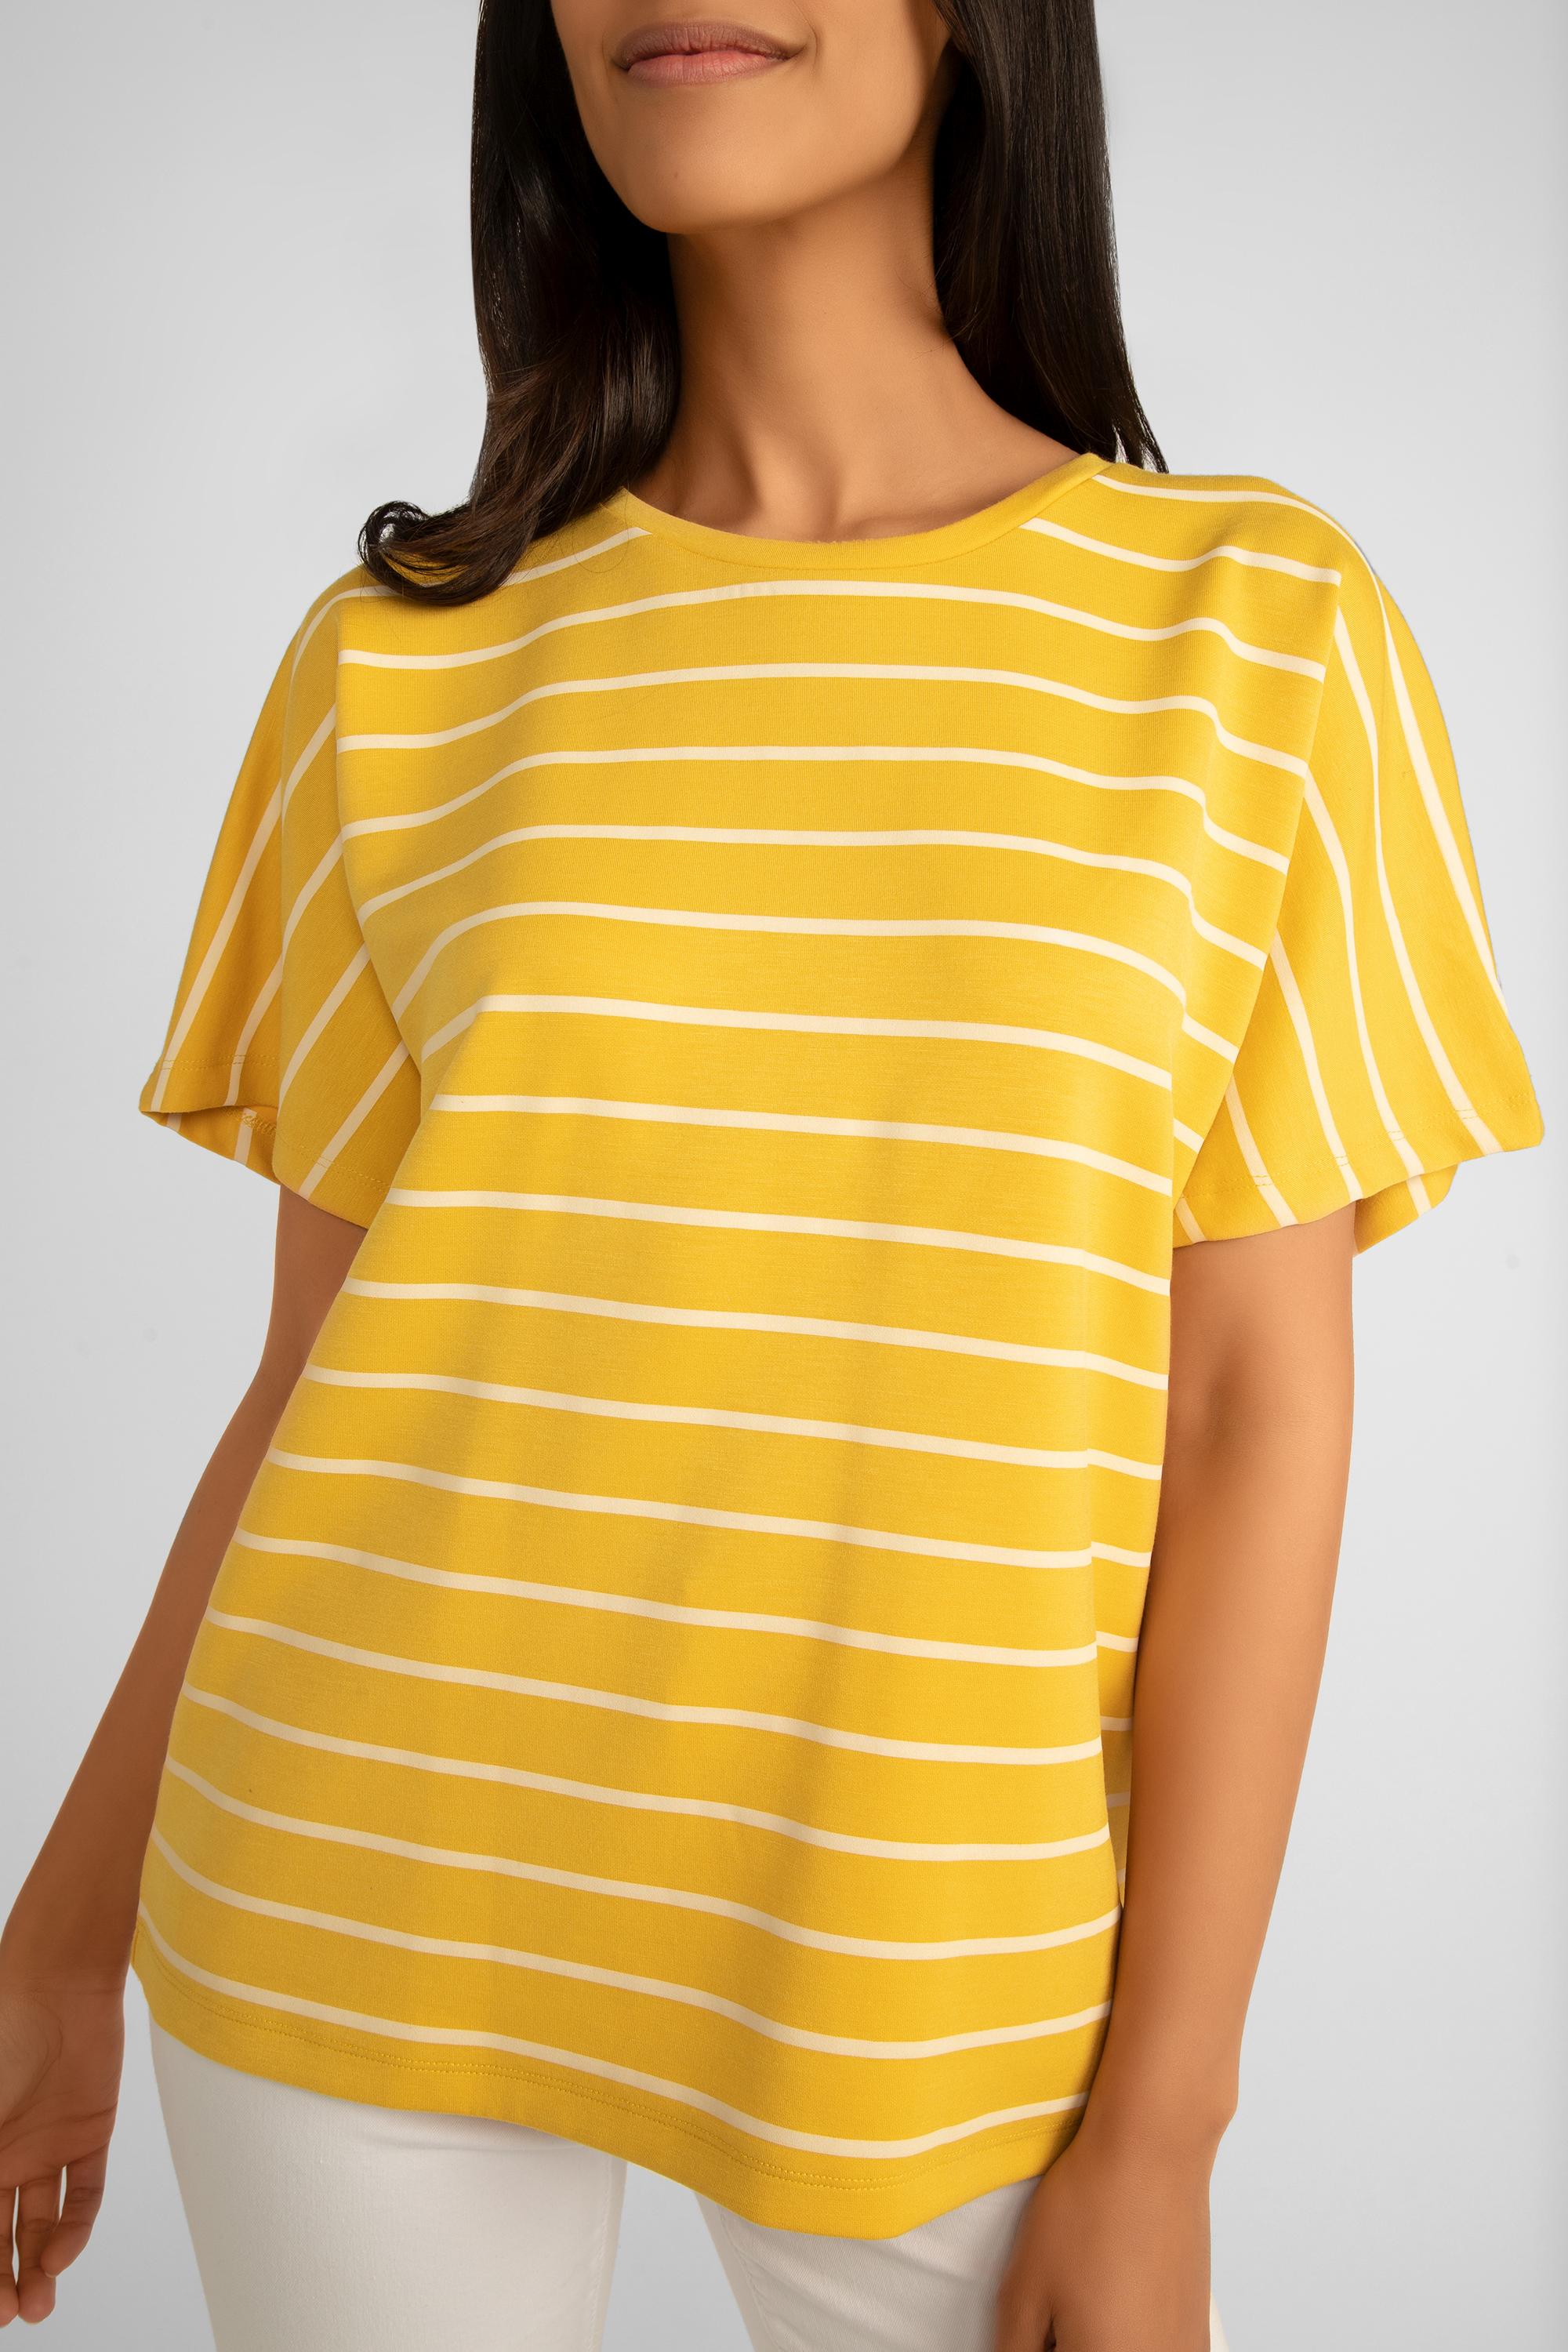 Soya Concept (26540) Women's Short Raglan Sleeve Stripes T-Shirt in Yellow with White Stripes